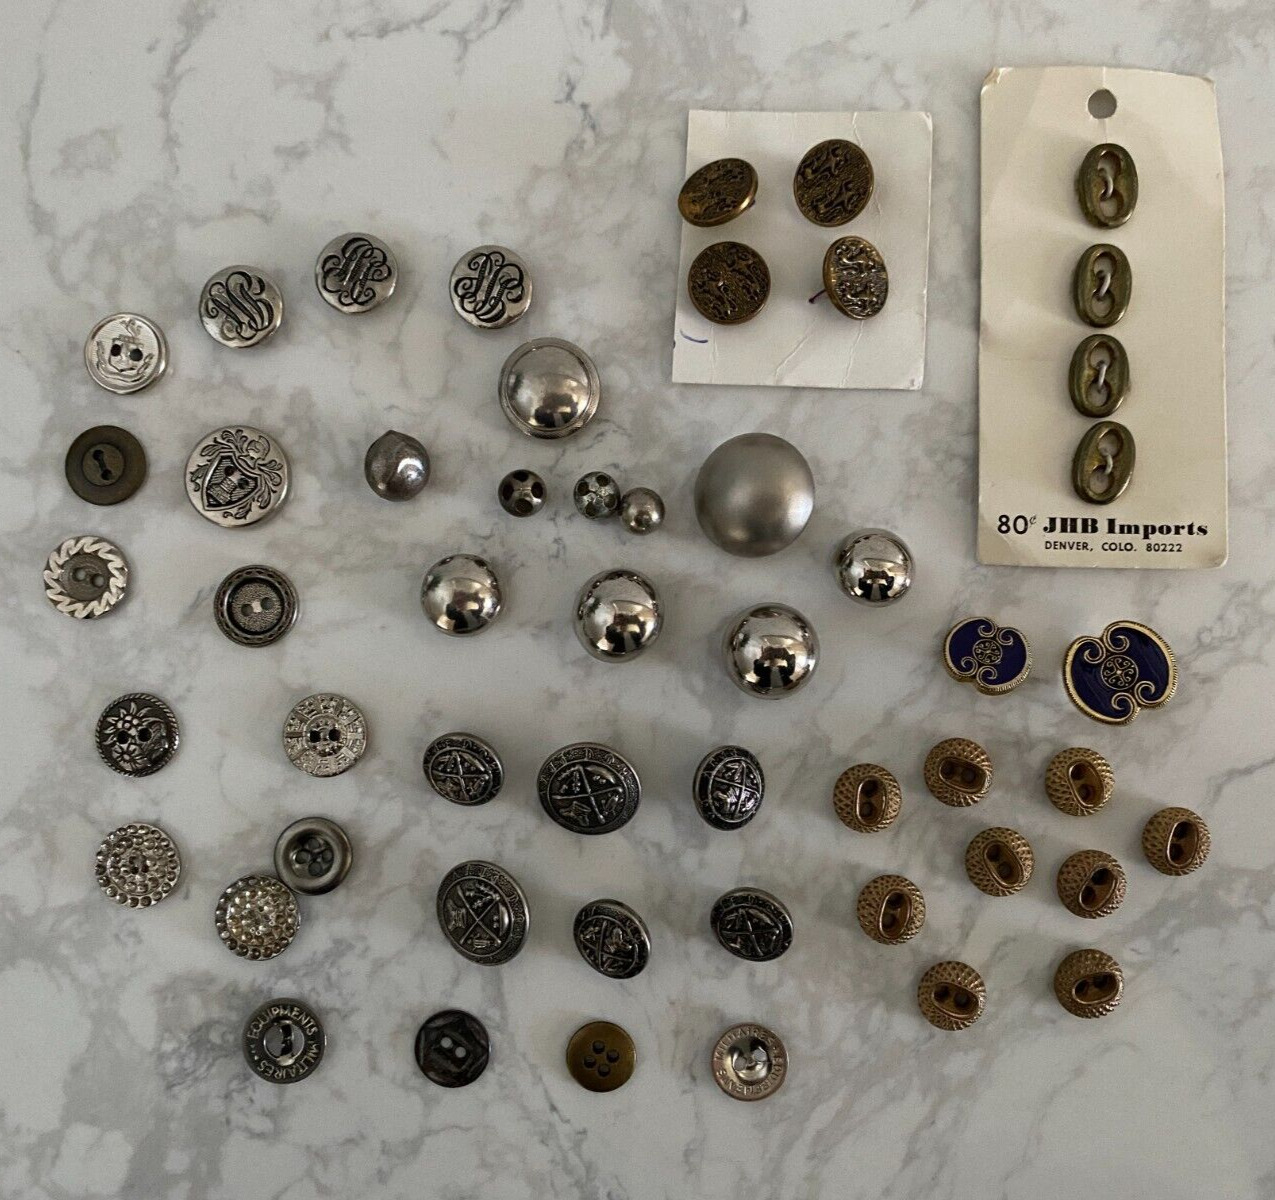 Lot of 50 Vintage Metal Buttons